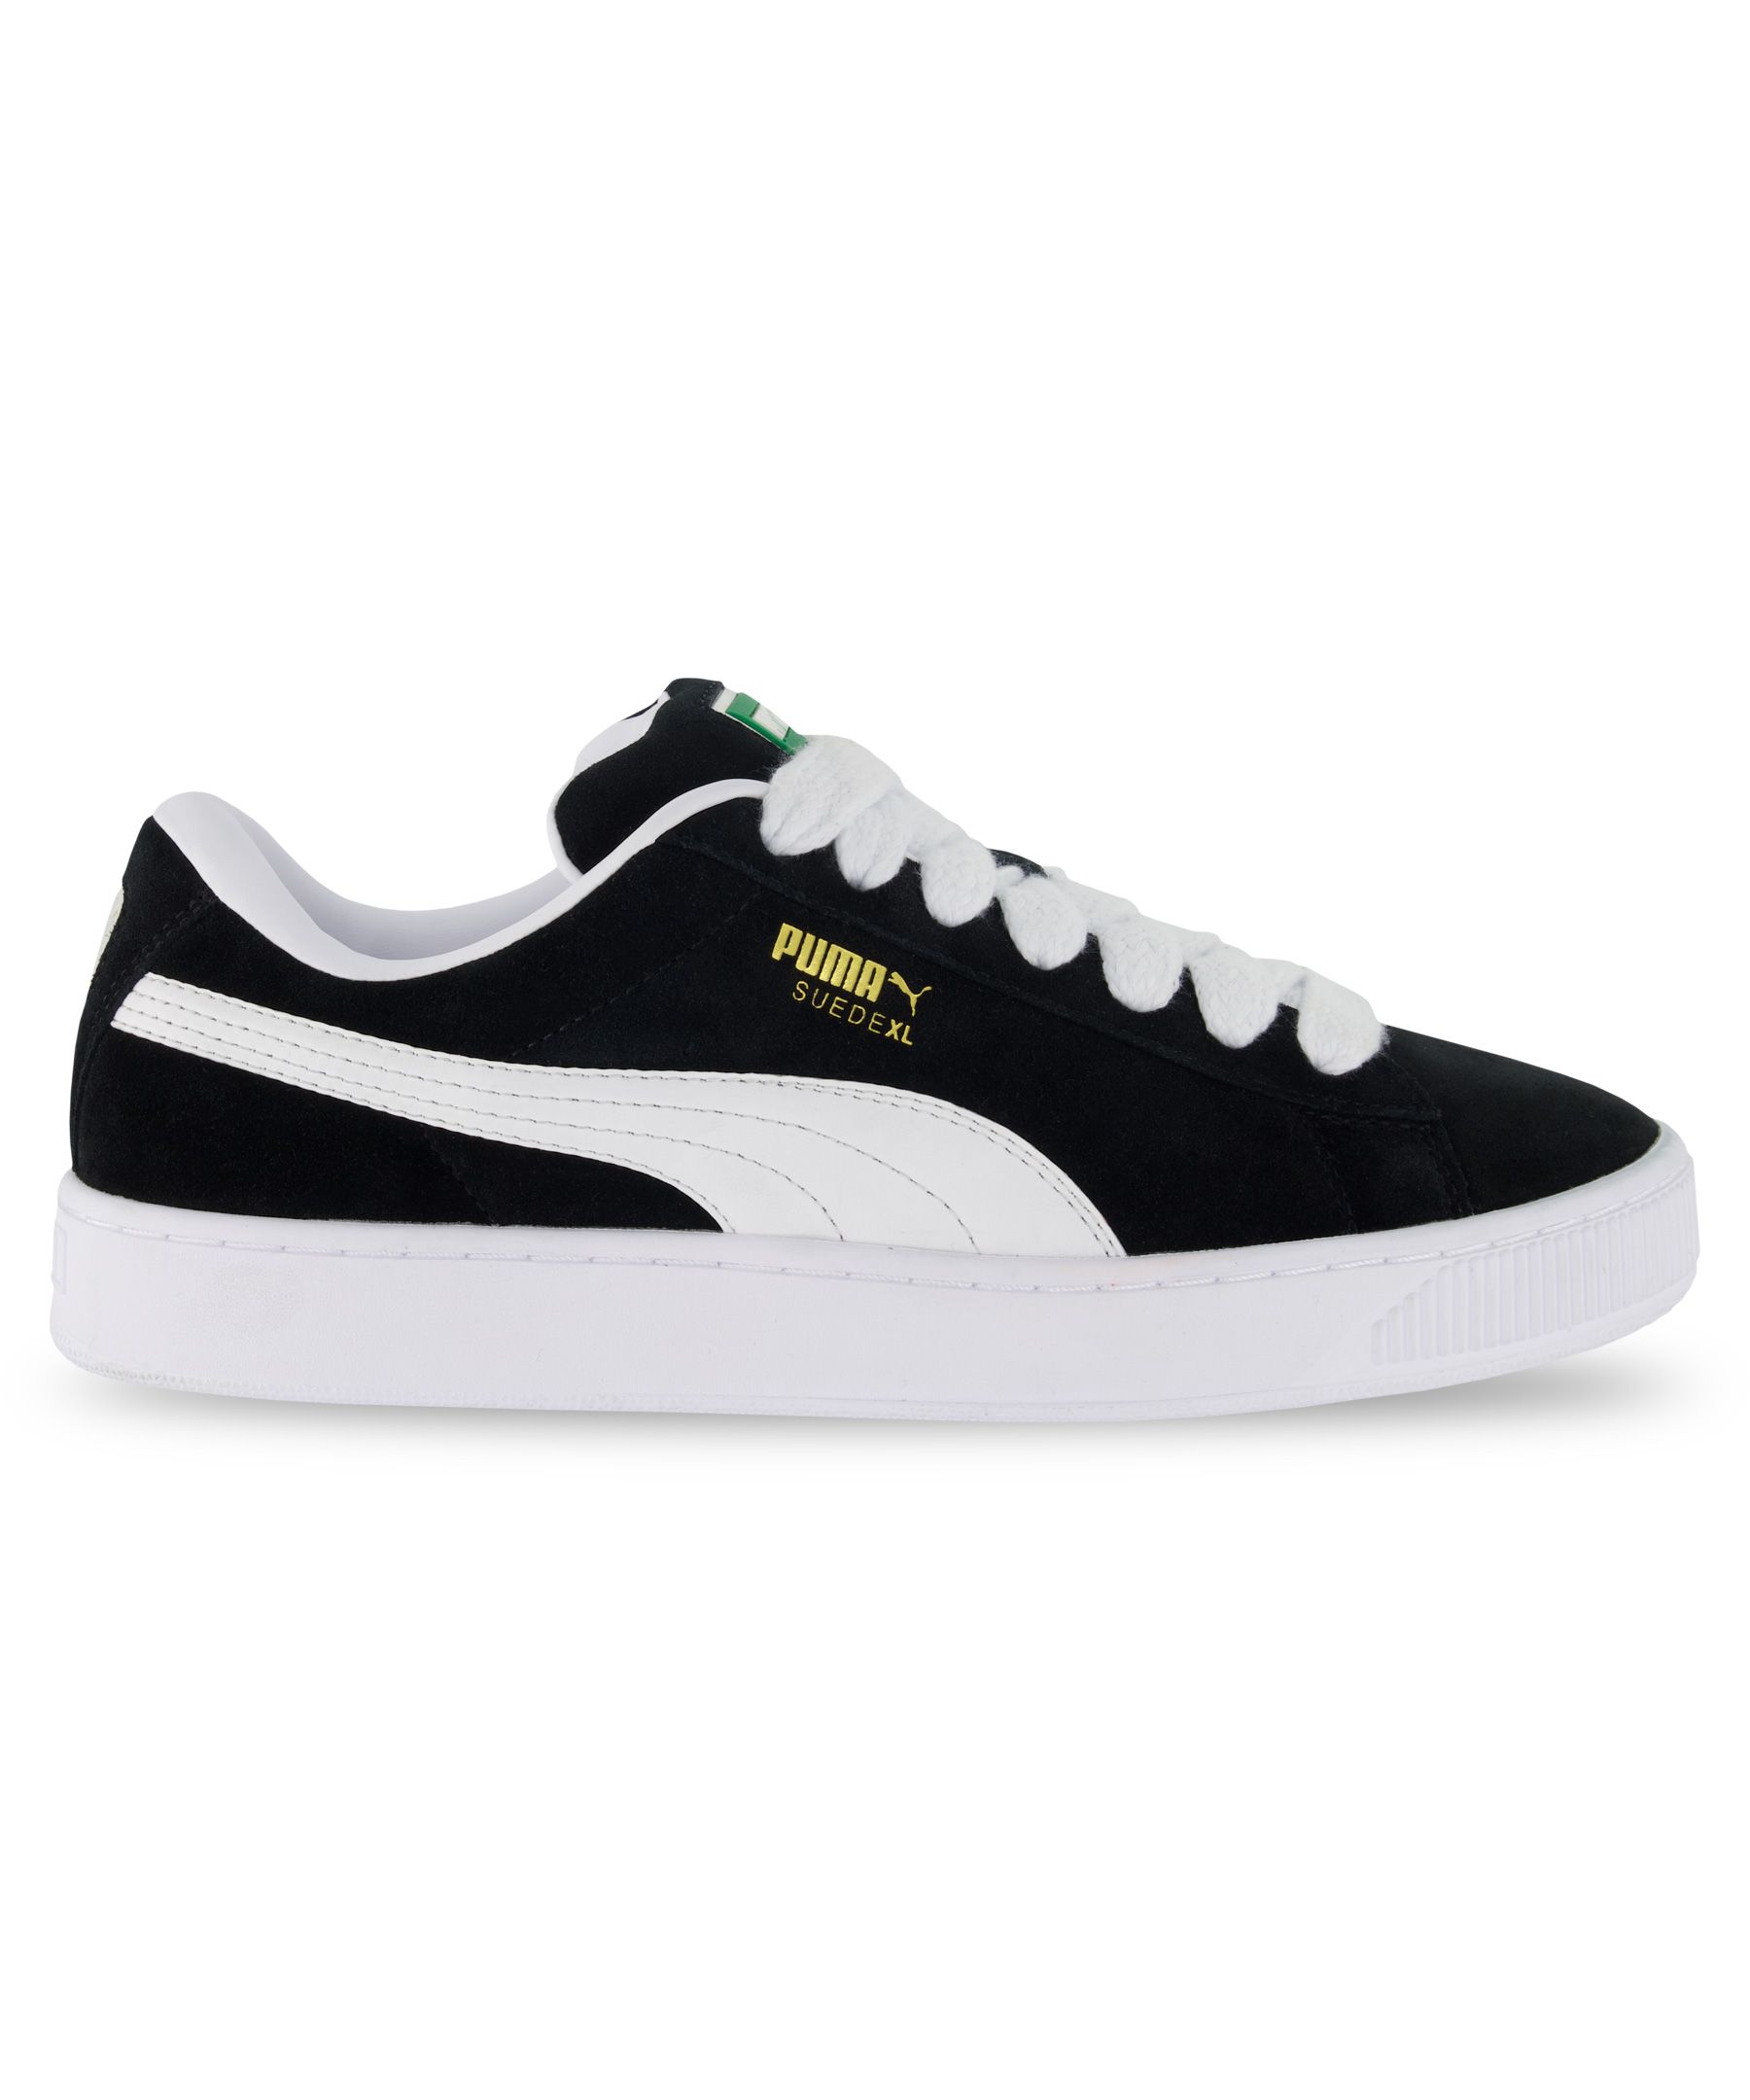 Image of Puma Men's Suede XL Classic Shoes Sneakers